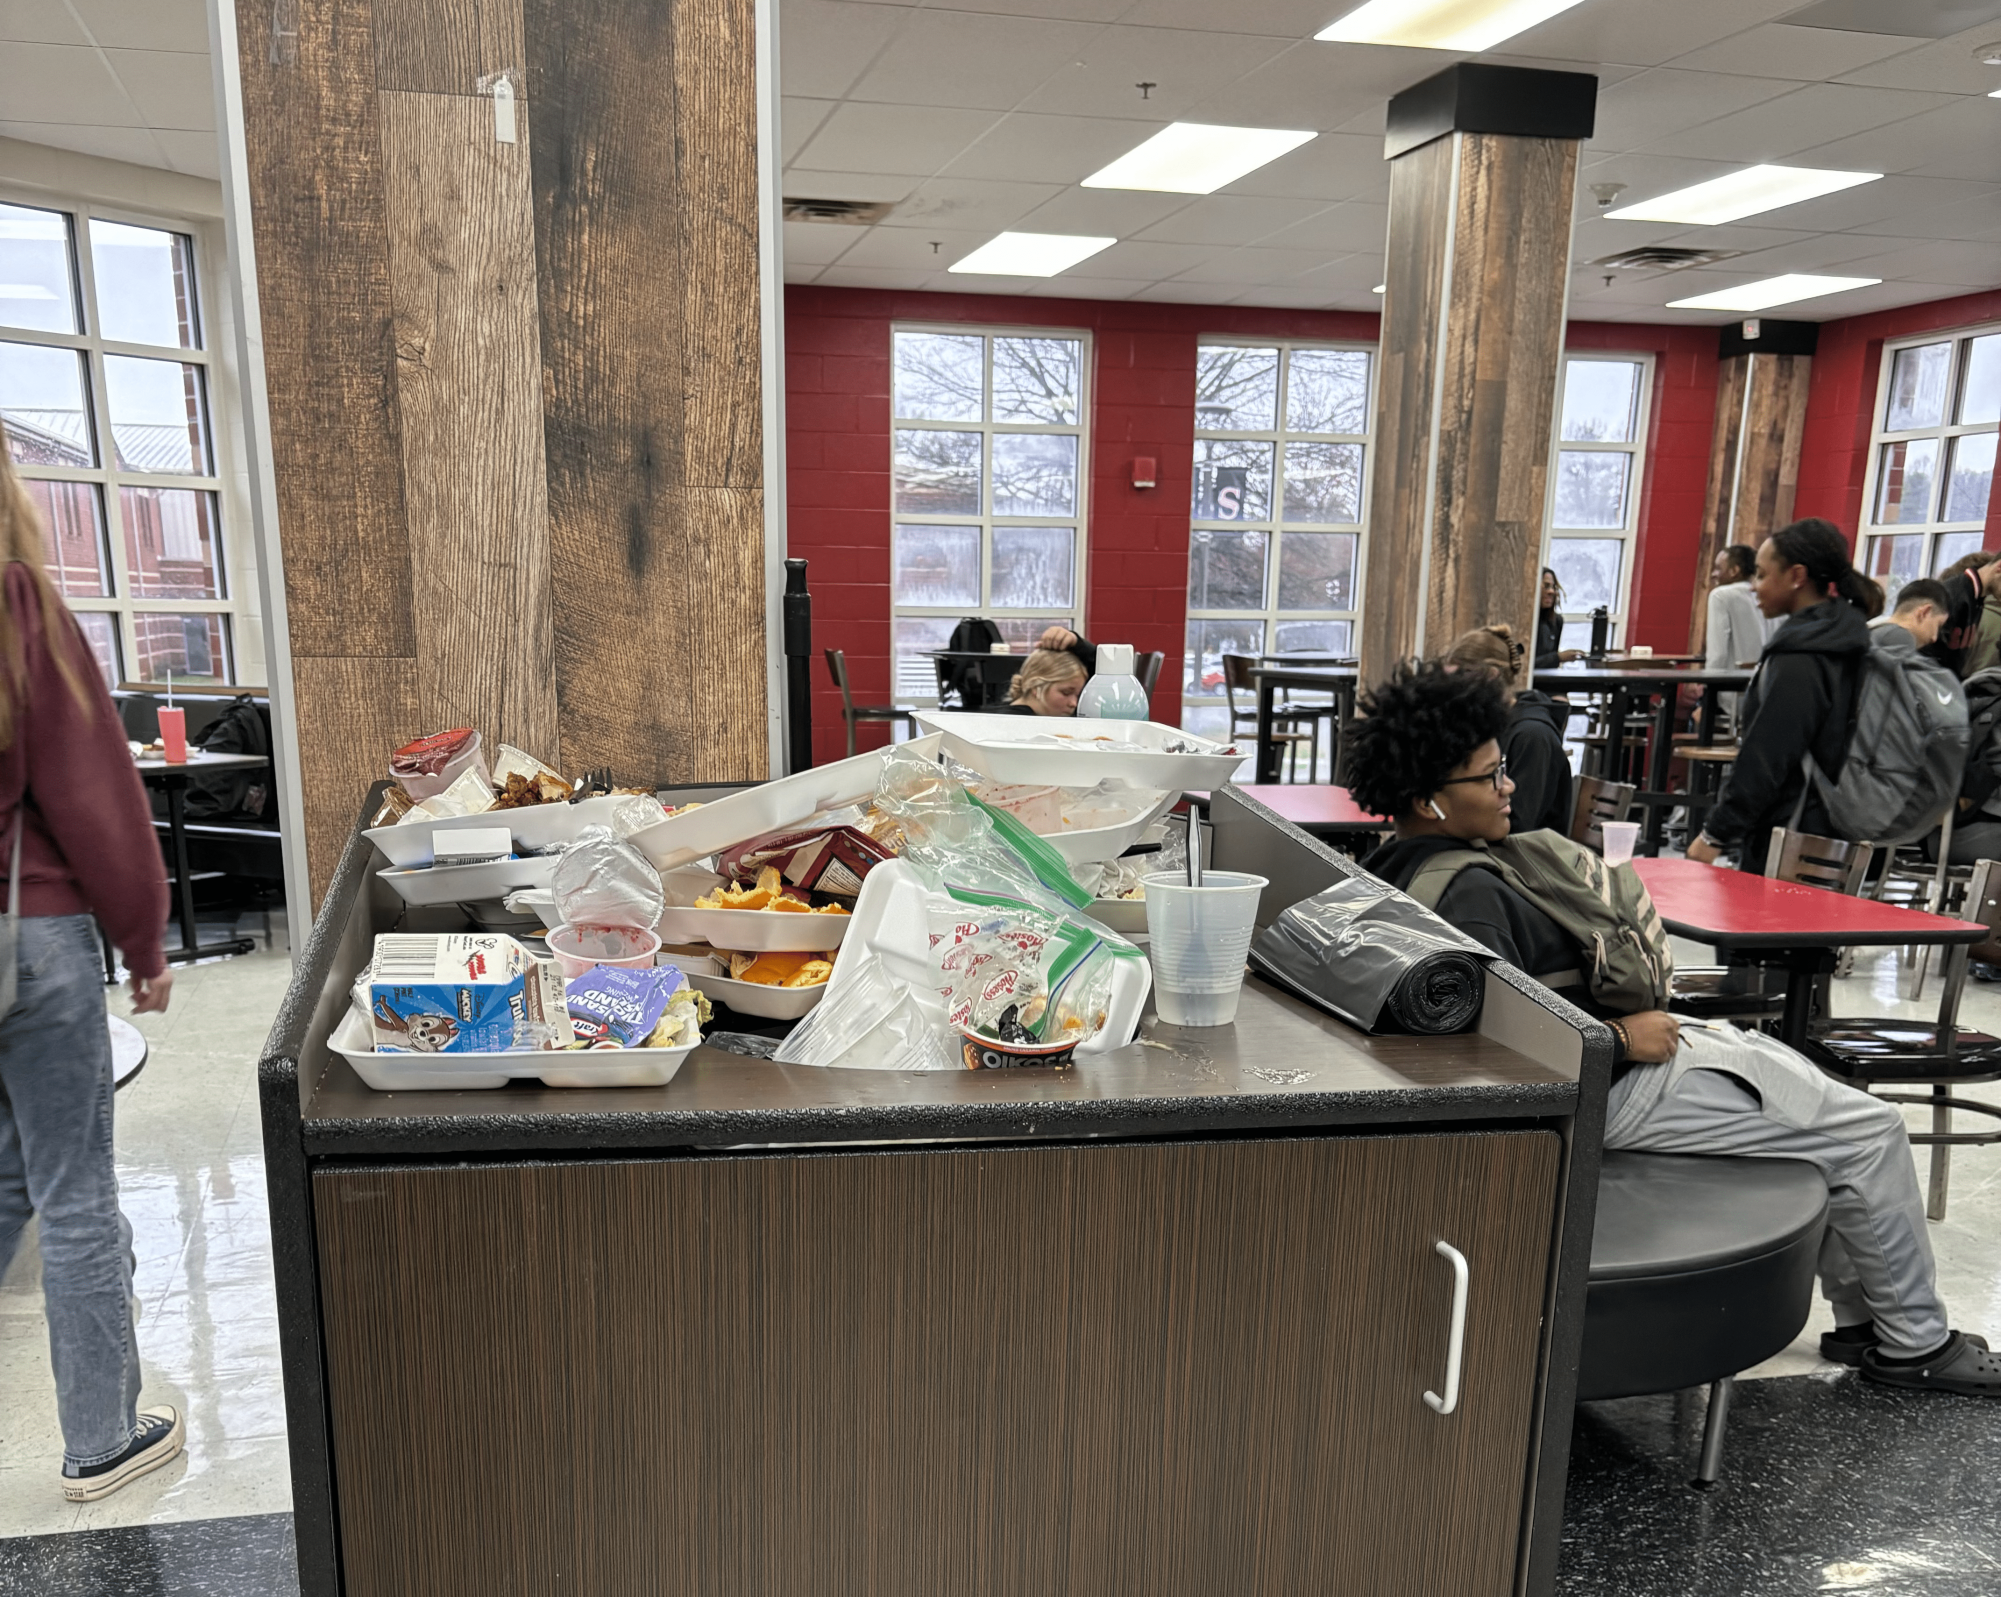 This photo shows the build-up of trash in cafeteria from students not utilizing the other trash cans, creating more mess for the custodians to clean. 